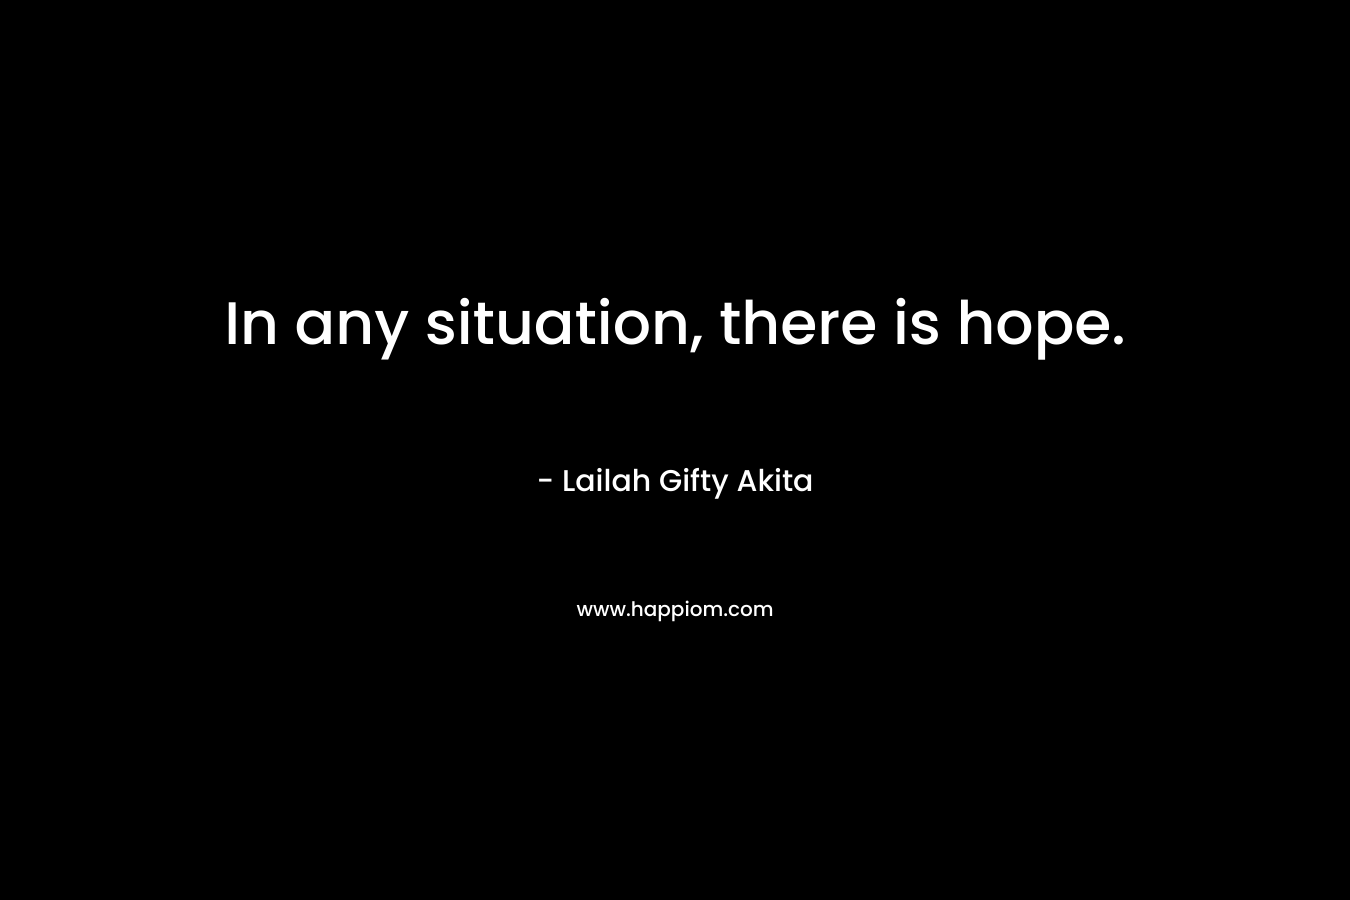 In any situation, there is hope.